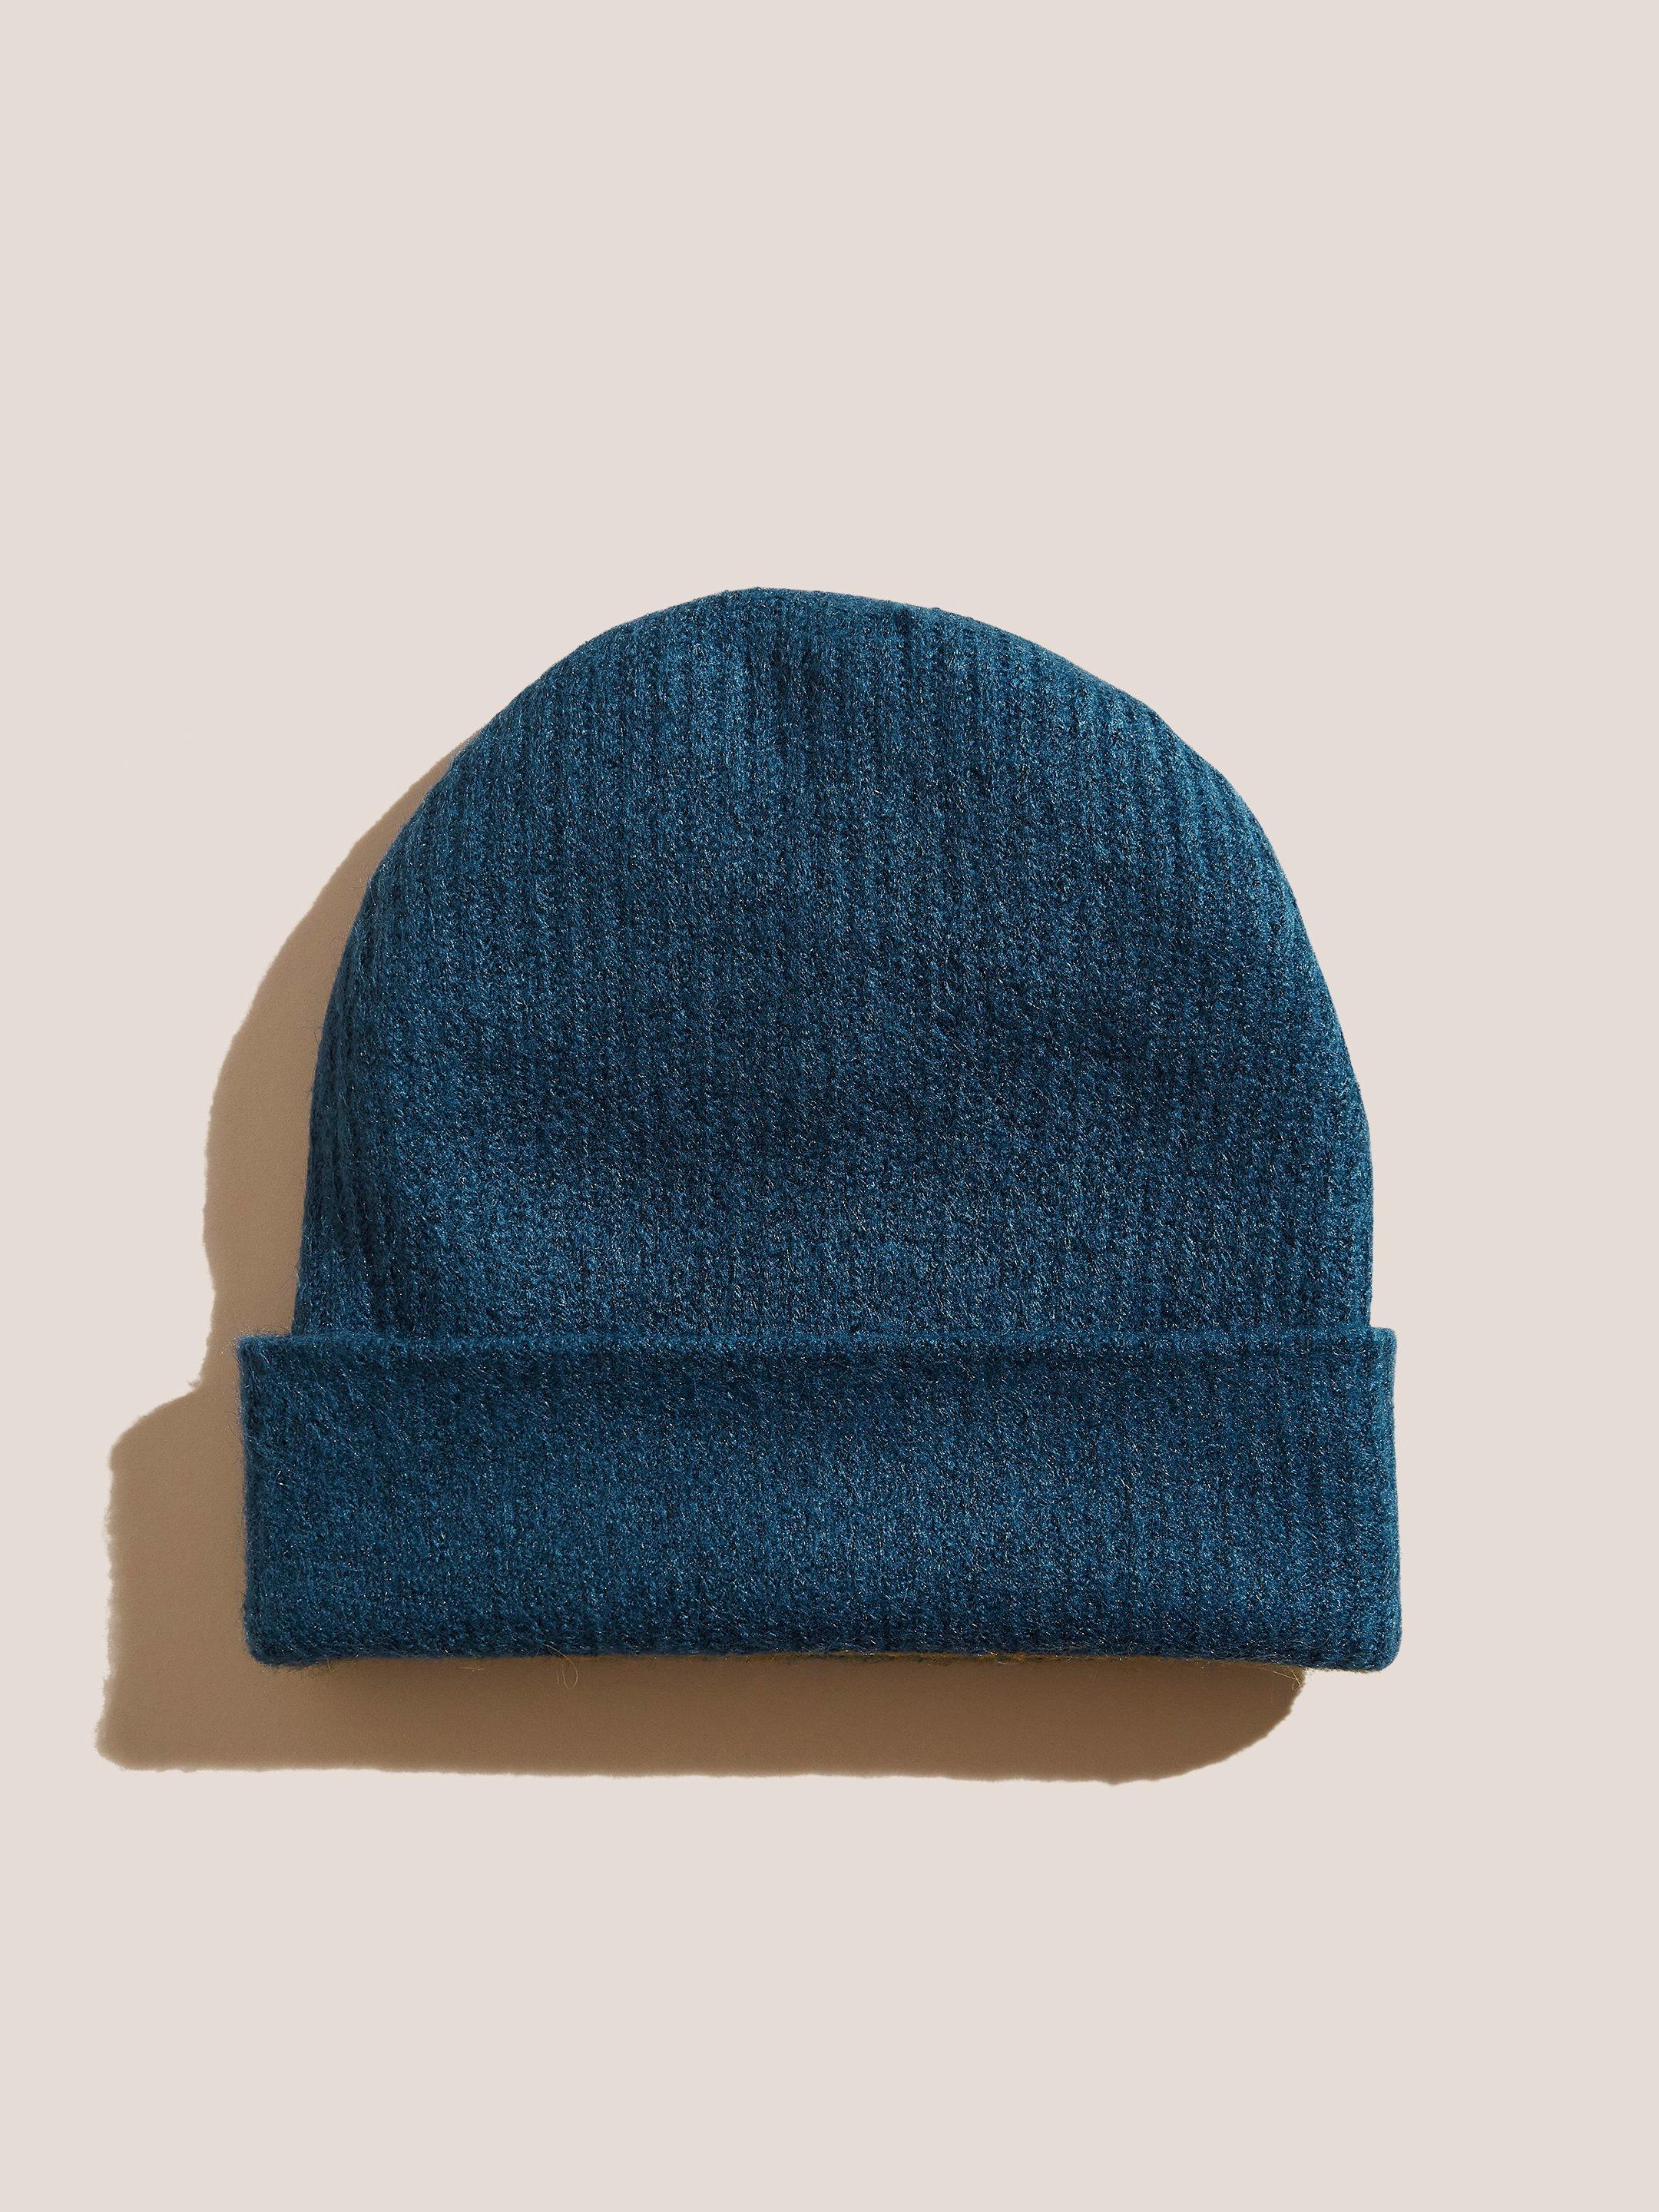 Reversible Colourblock Beanie in TEAL MLT - FLAT FRONT